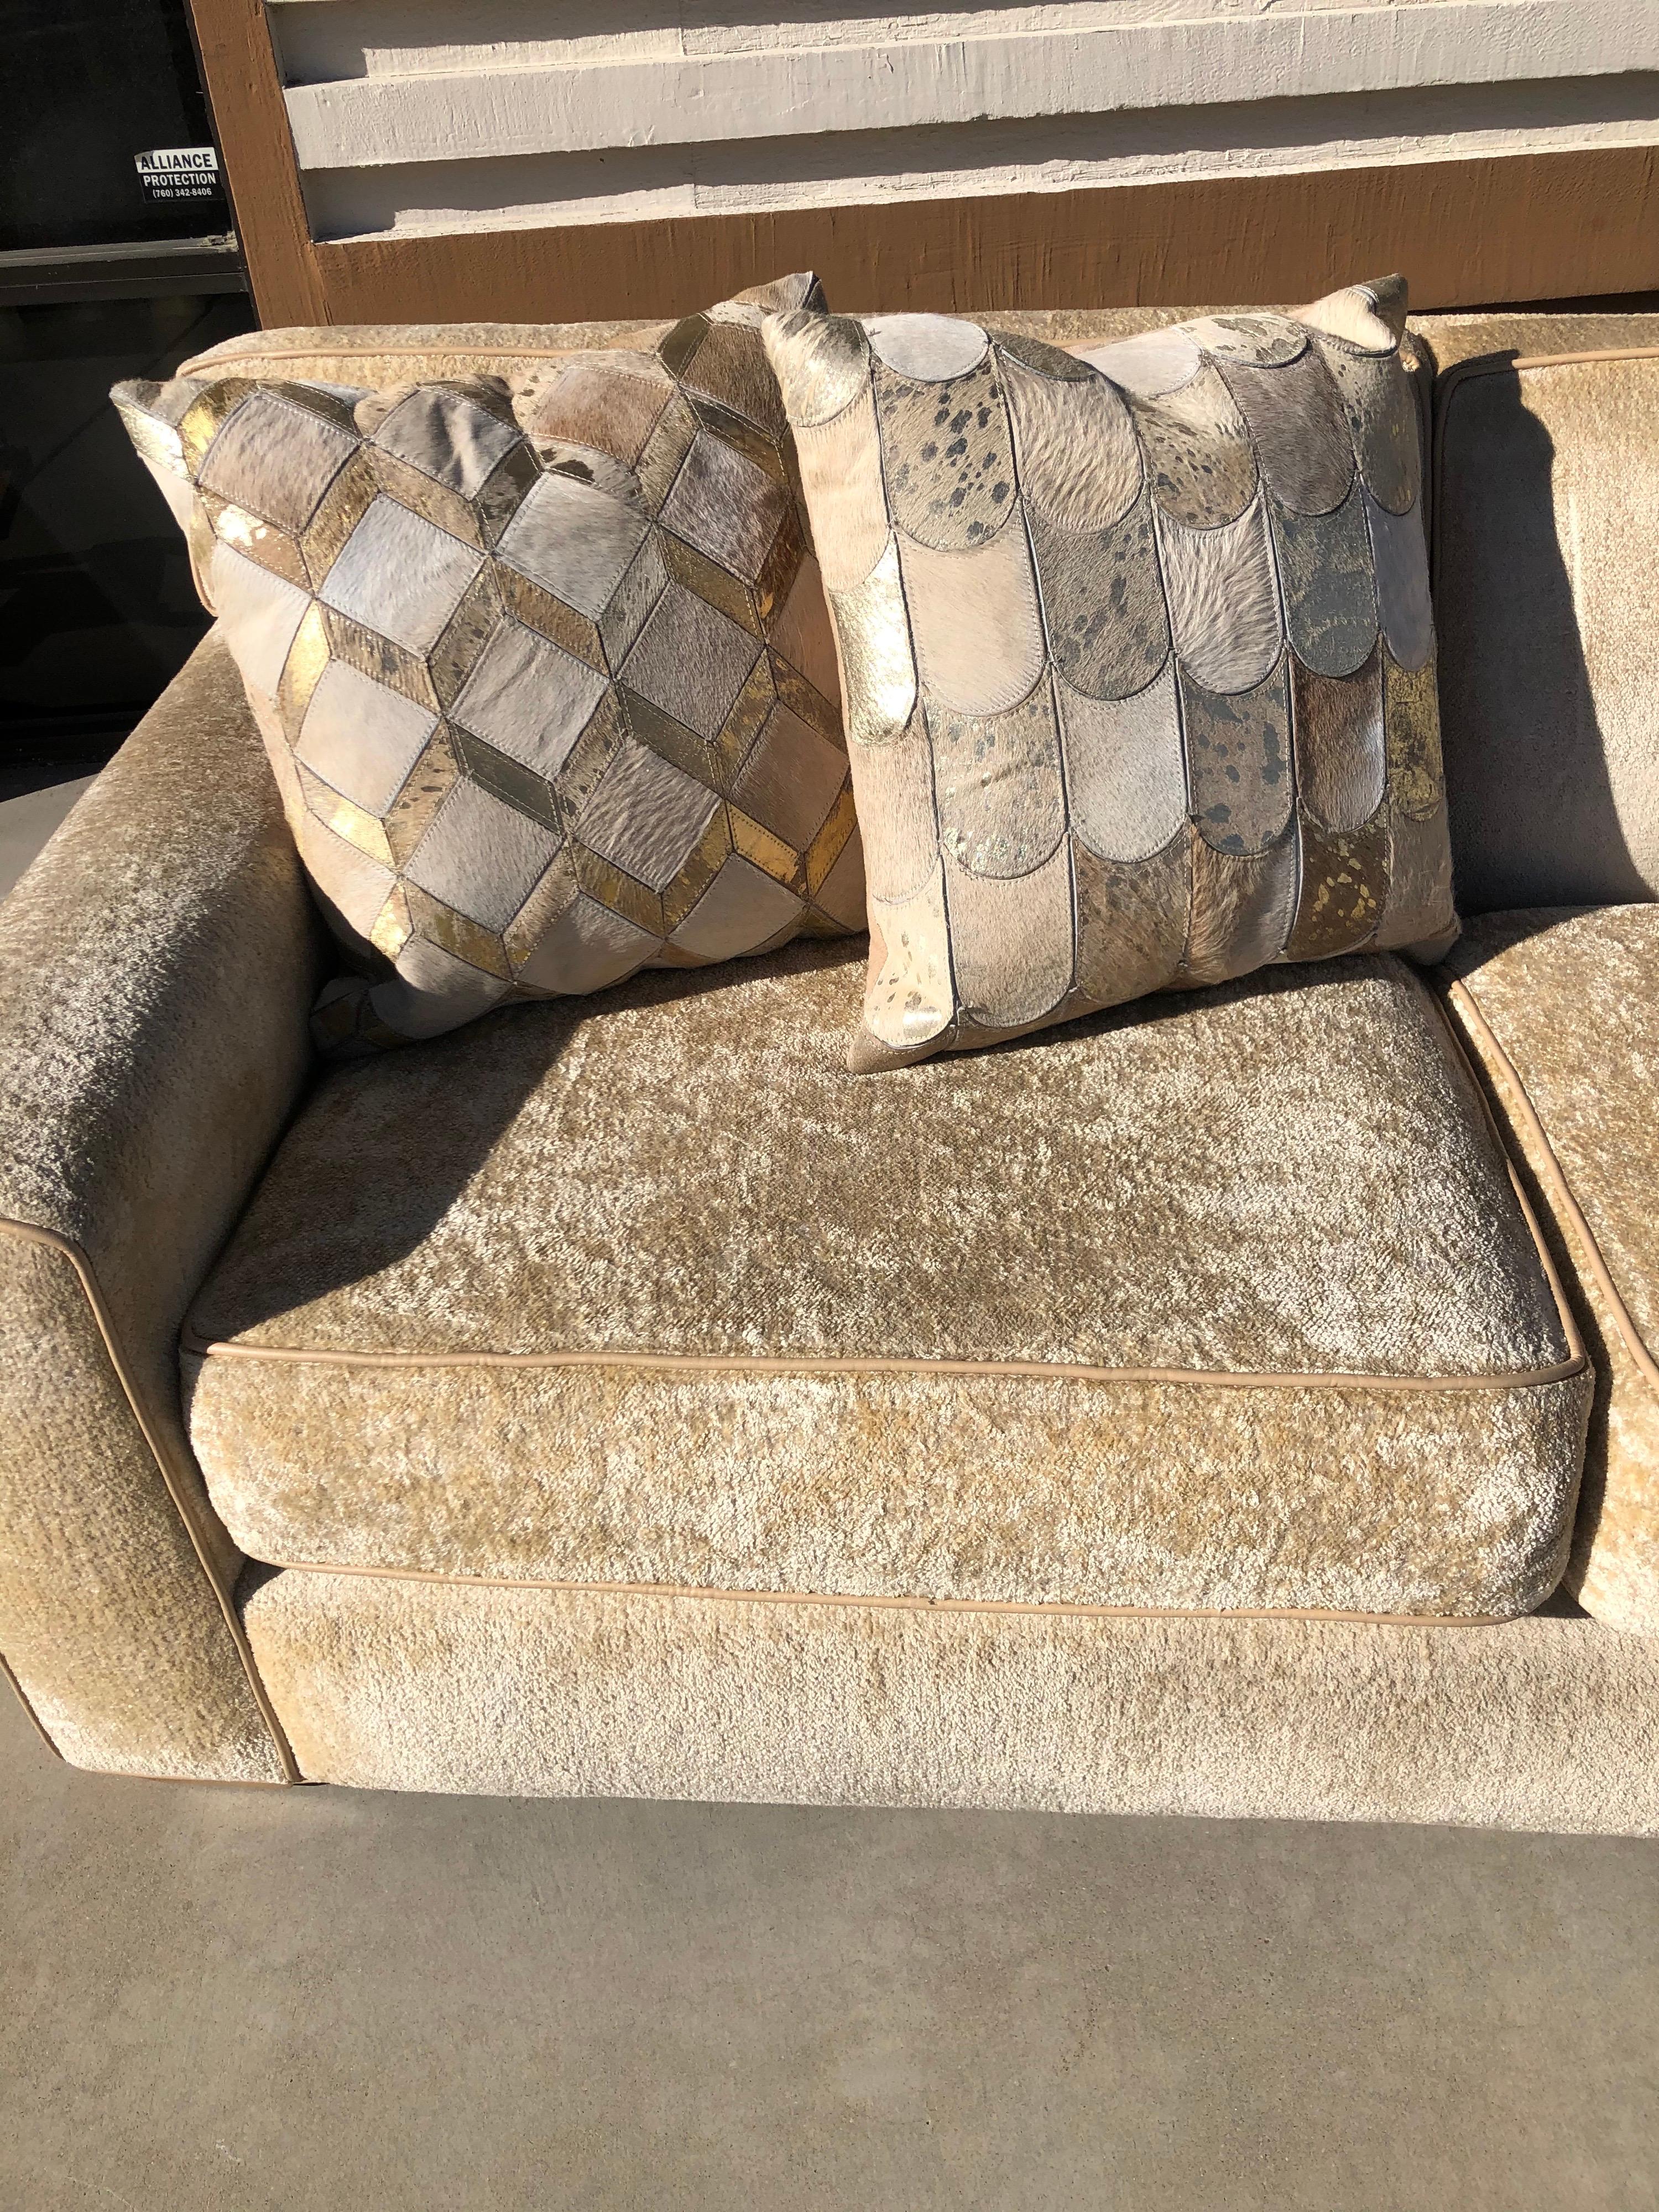 This beautiful sofa made by A. Rudin in Los Angeles was custom ordered from an amazing Palm Springs residence. Very much done in the modern style of Jean Michel Frank. As comfortable as it is good looking. Soft chenille has a NAP like velvet. Color